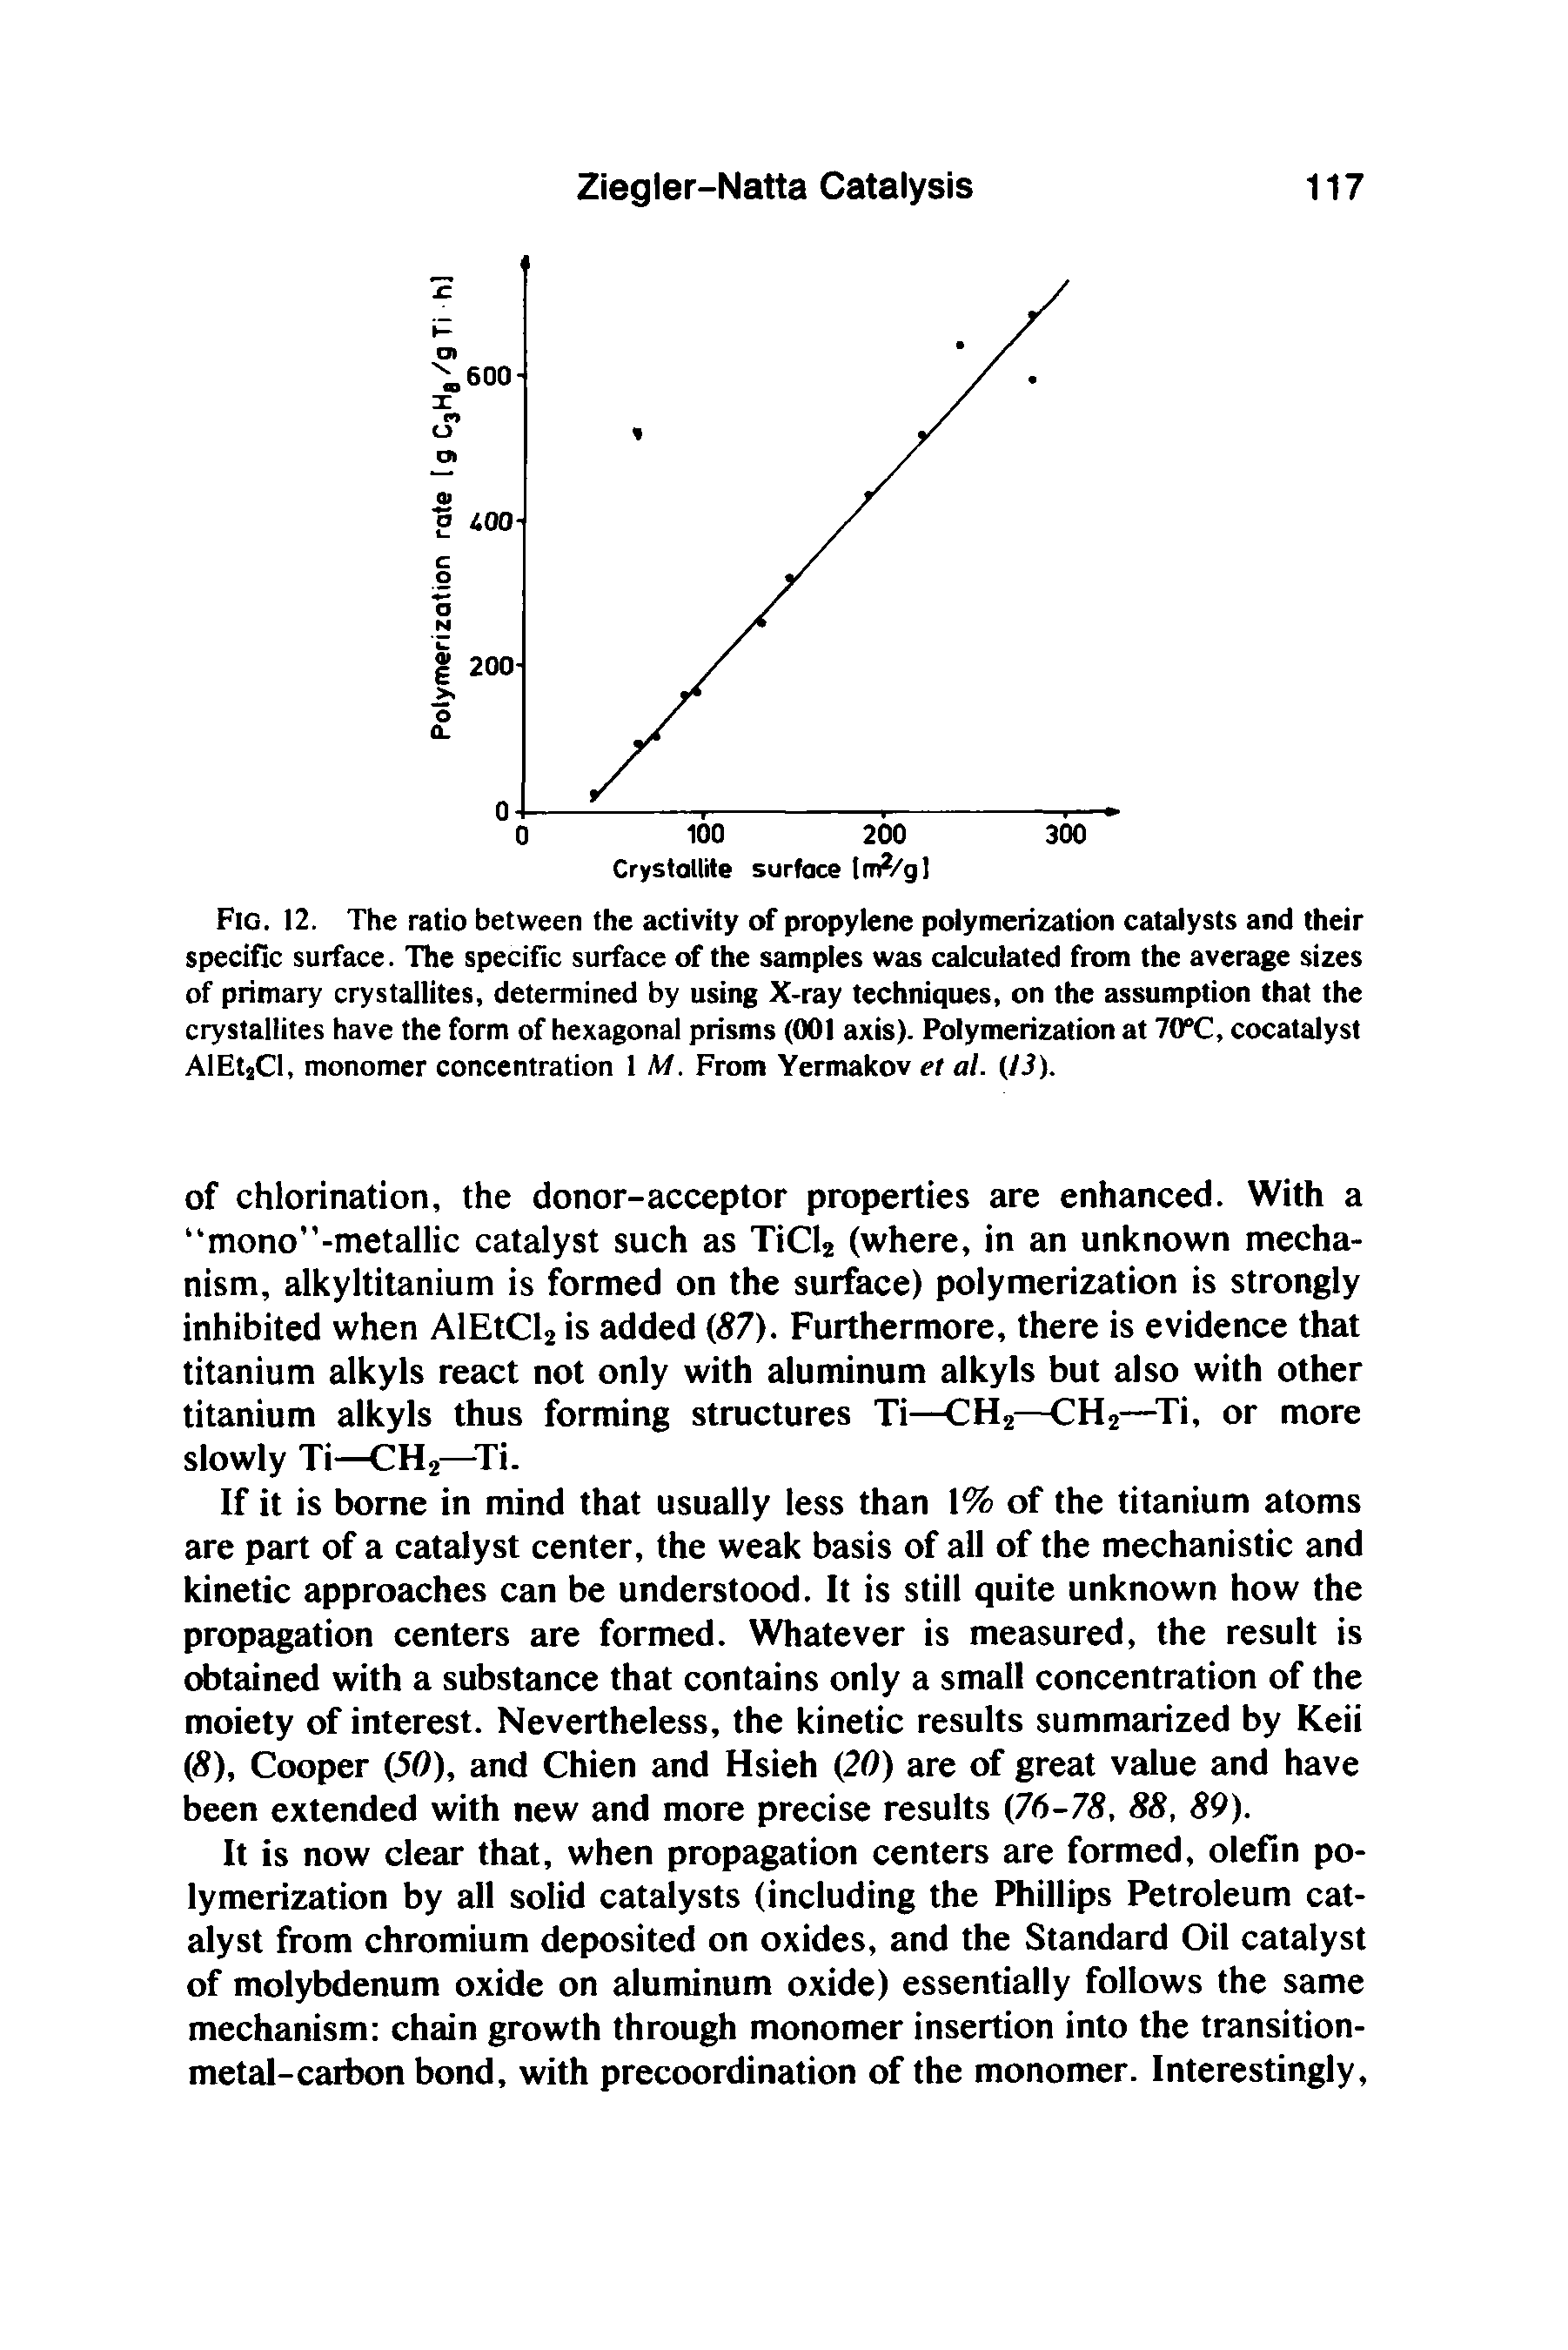 Fig. 12. The ratio between the activity of propylene polymerization catalysts and their specific surface. The specific surface of the samples was calculated from the average sizes of primary crystallites, determined by using X-ray techniques, on the assumption that the crystallites have the form of hexagonal prisms (001 axis). Polymerization at 70°C, cocatalyst AlEtjCl, monomer concentration 1 M. From Yermakov et at. (13).